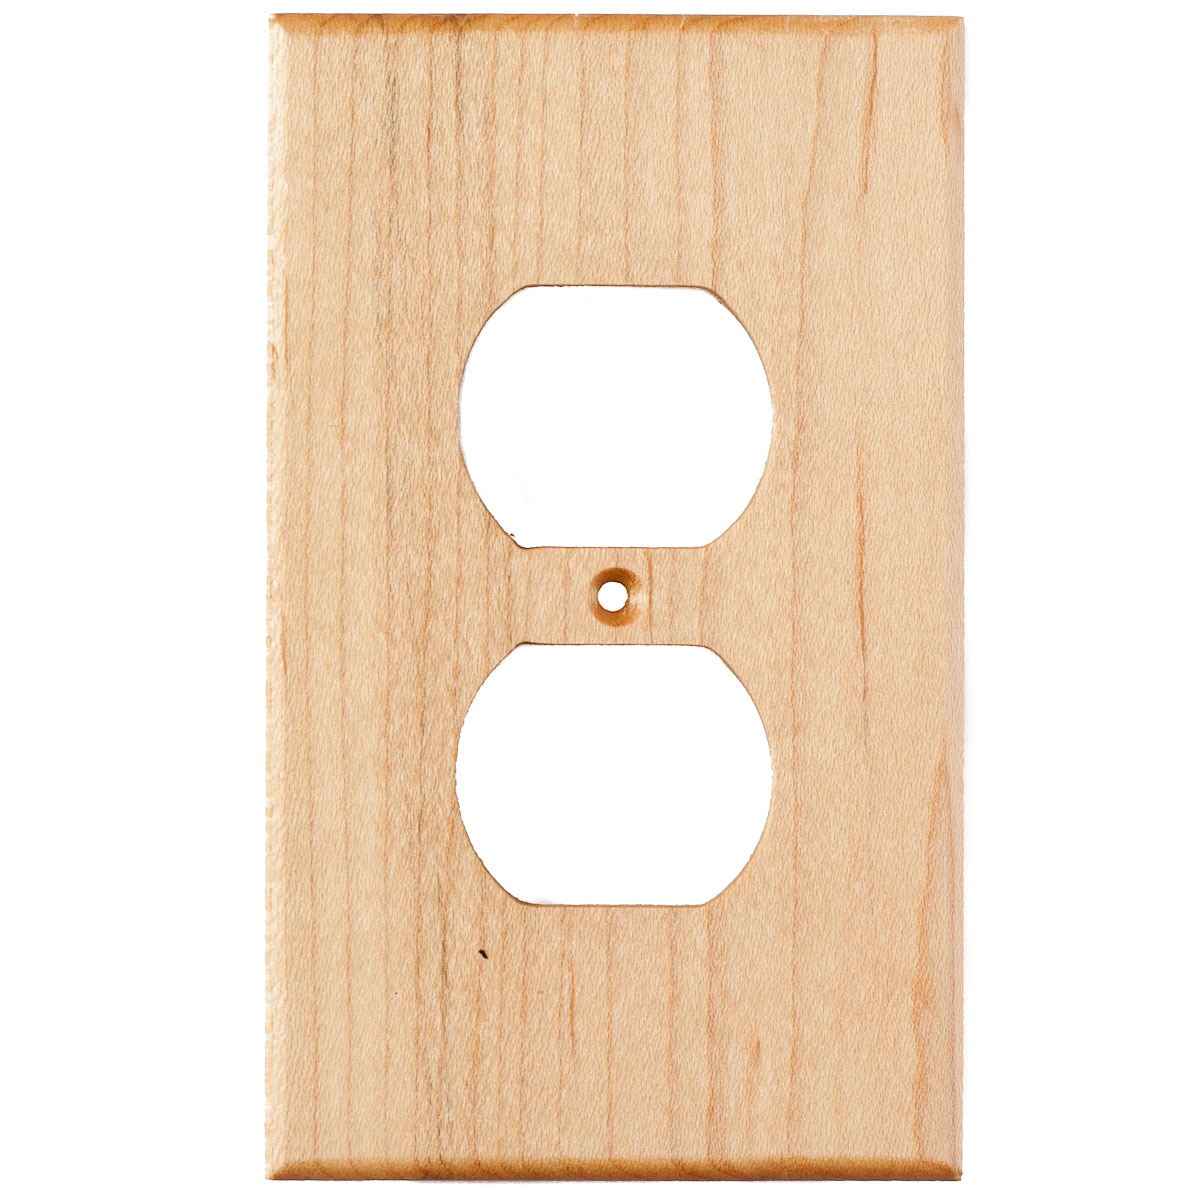 Maple Wood Wall Plate - 1 Gang Duplex Outlet Cover - Virgin Timber Lumber